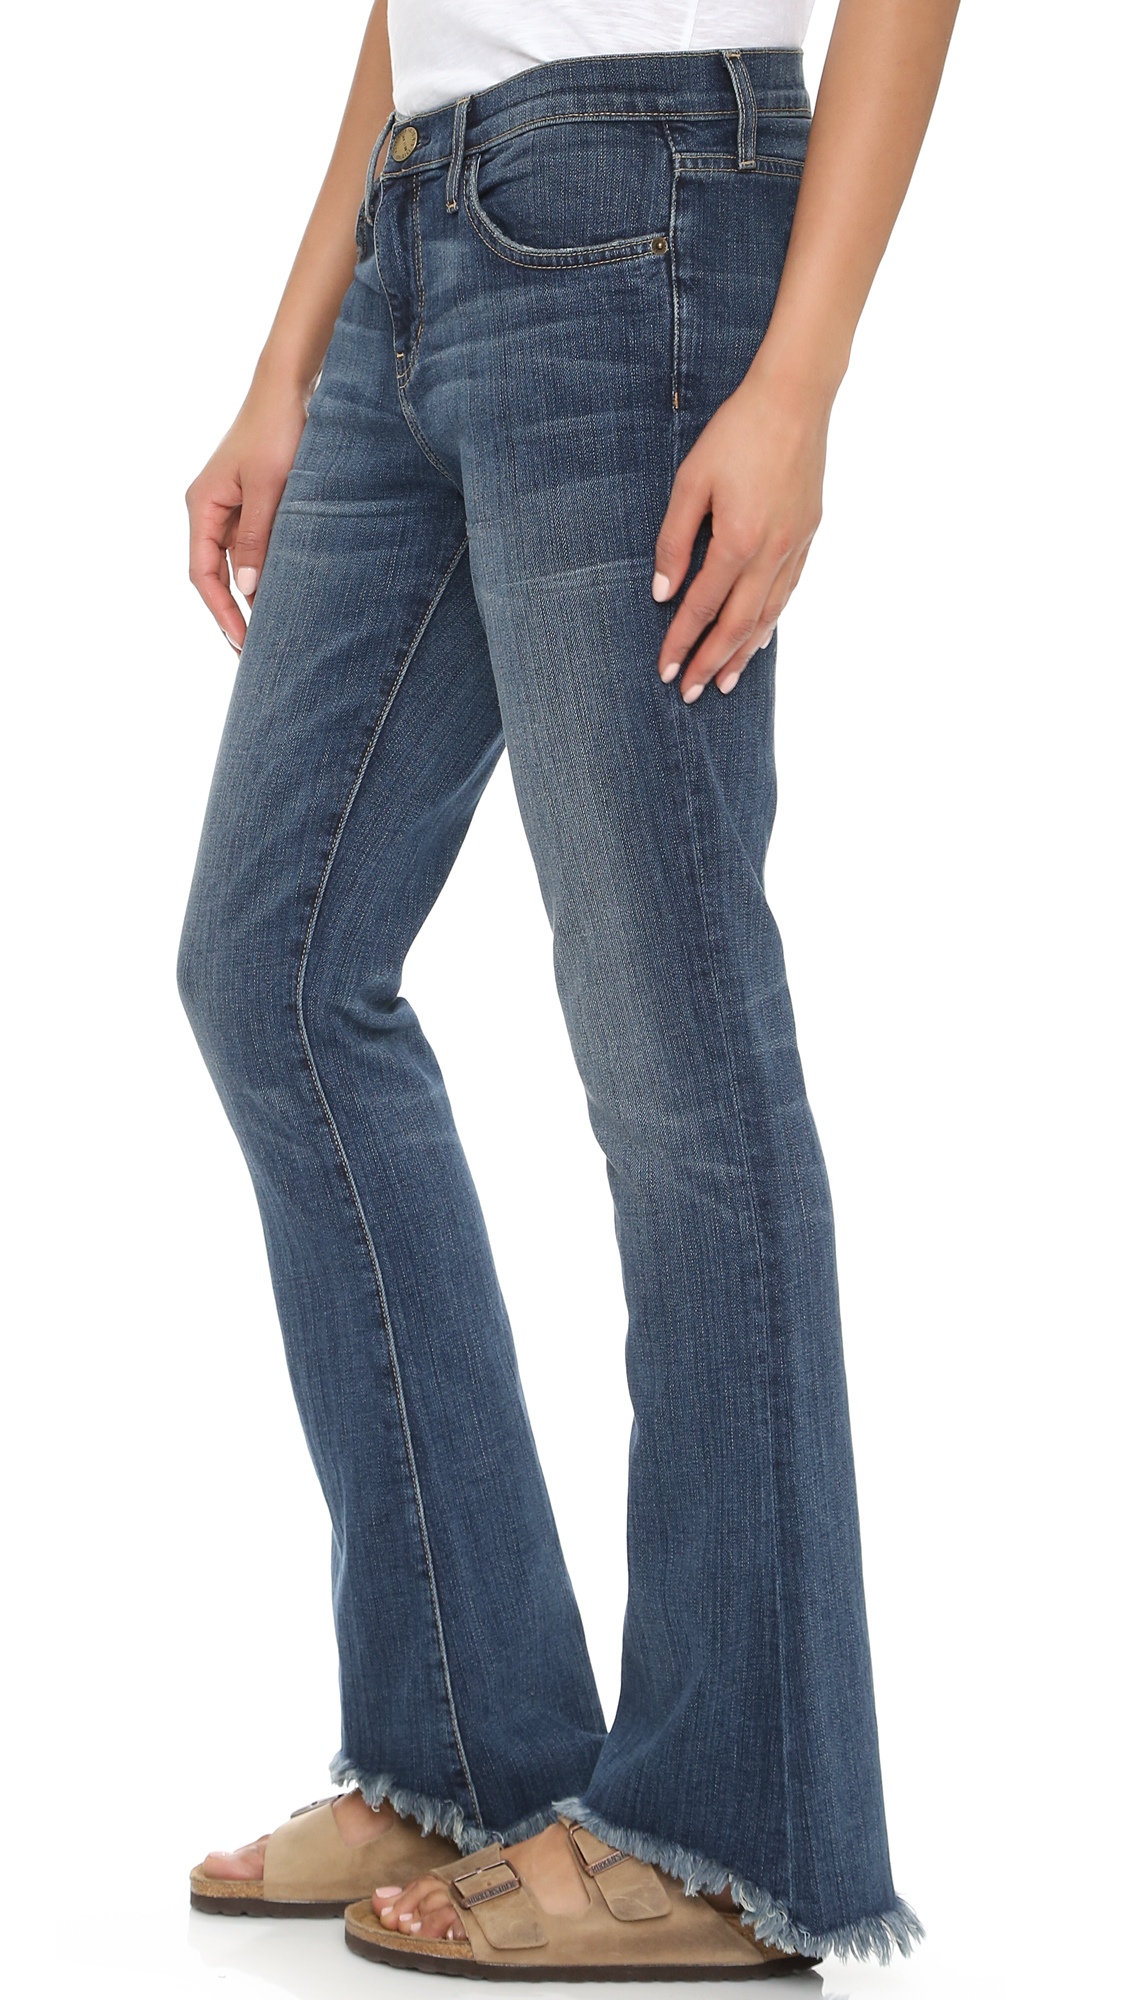 Lyst - Current/Elliott The Flip Flop Jeans in Blue